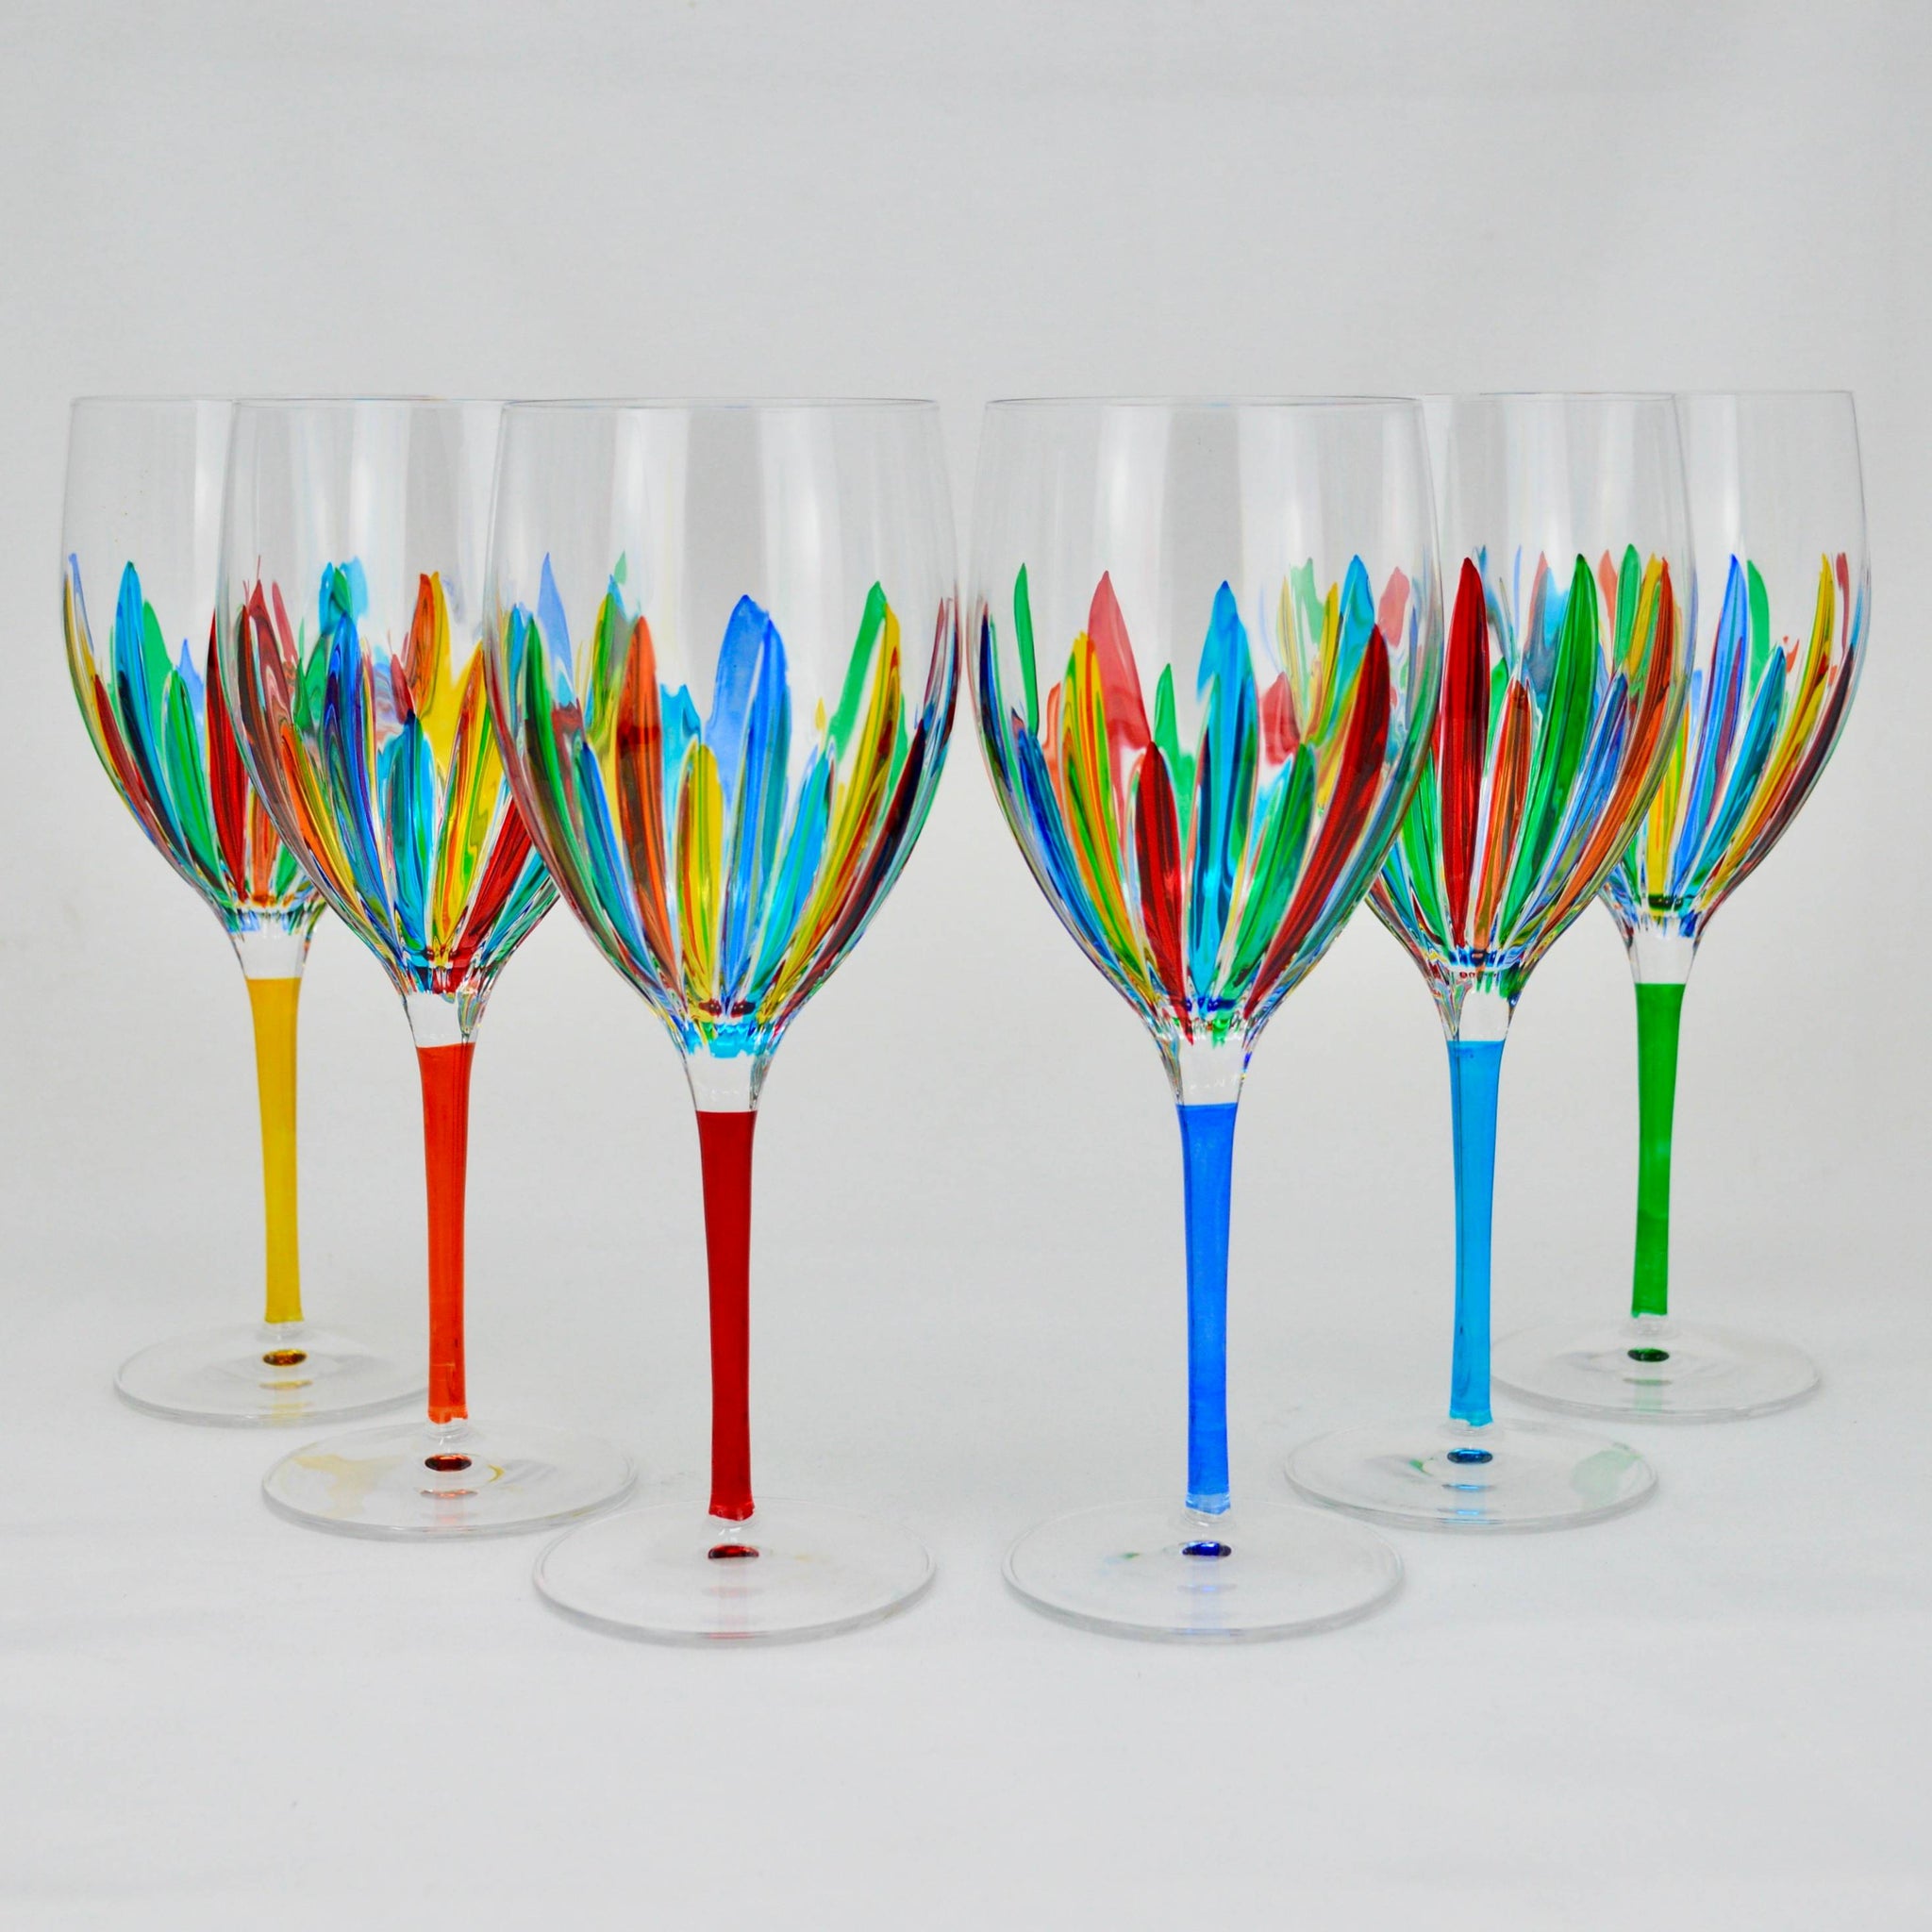 Flowervine Tall Drink Glasses, Set of 2, Hand-Painted Italian Crystal